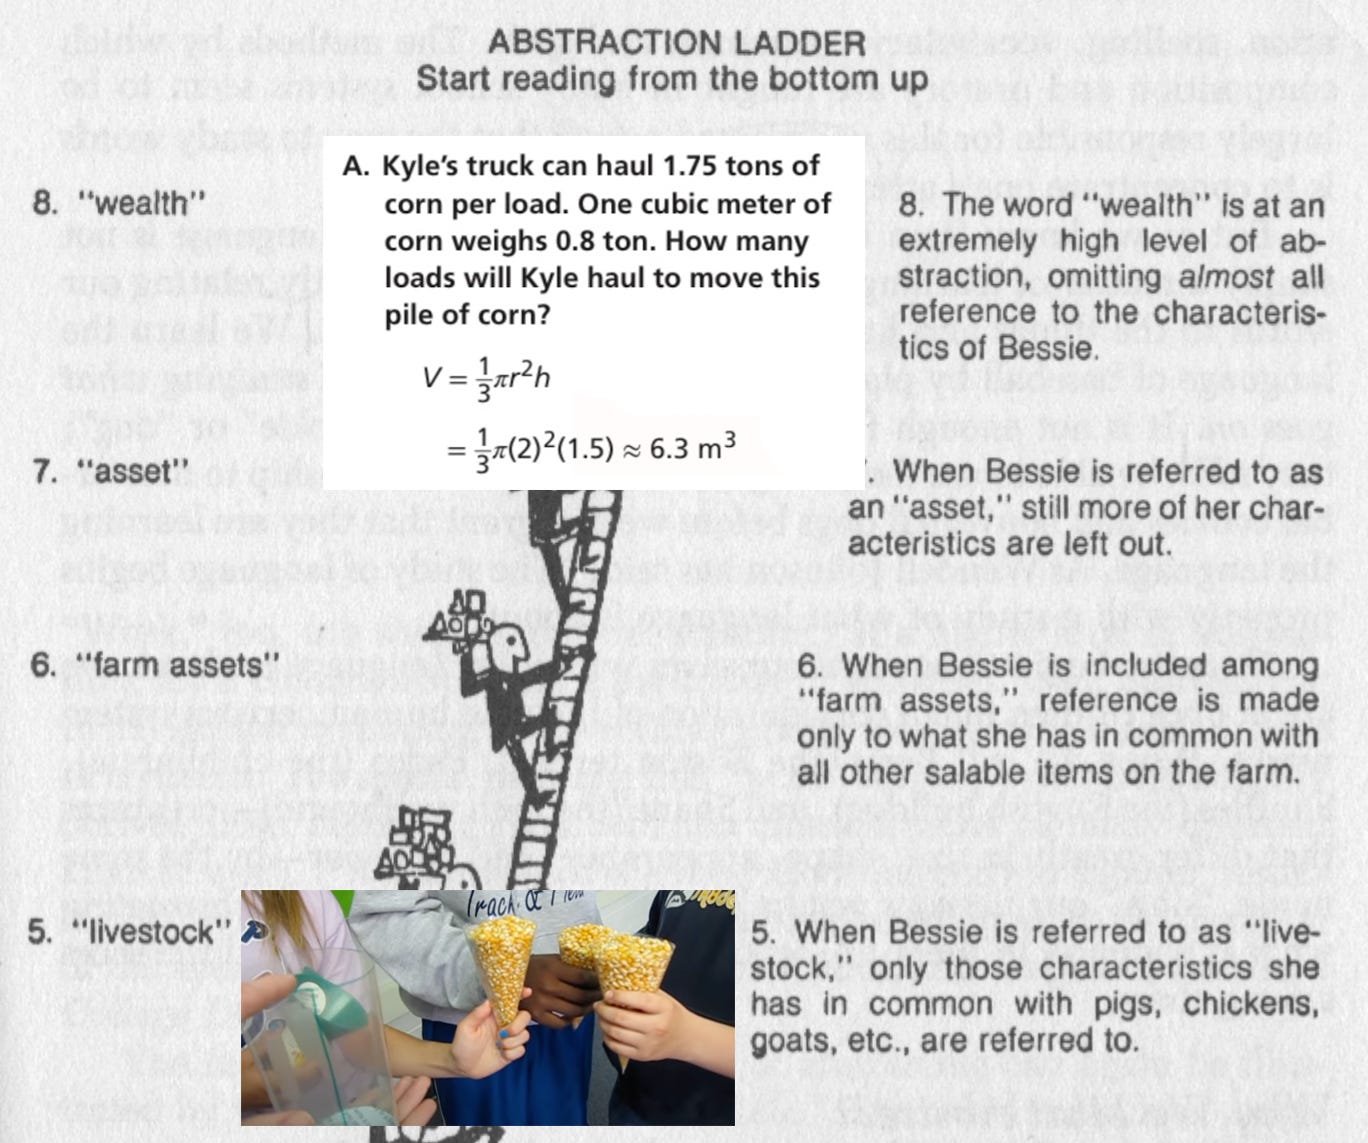 An image of the abstraction ladder with the corn at the bottom and the word problem at the top.